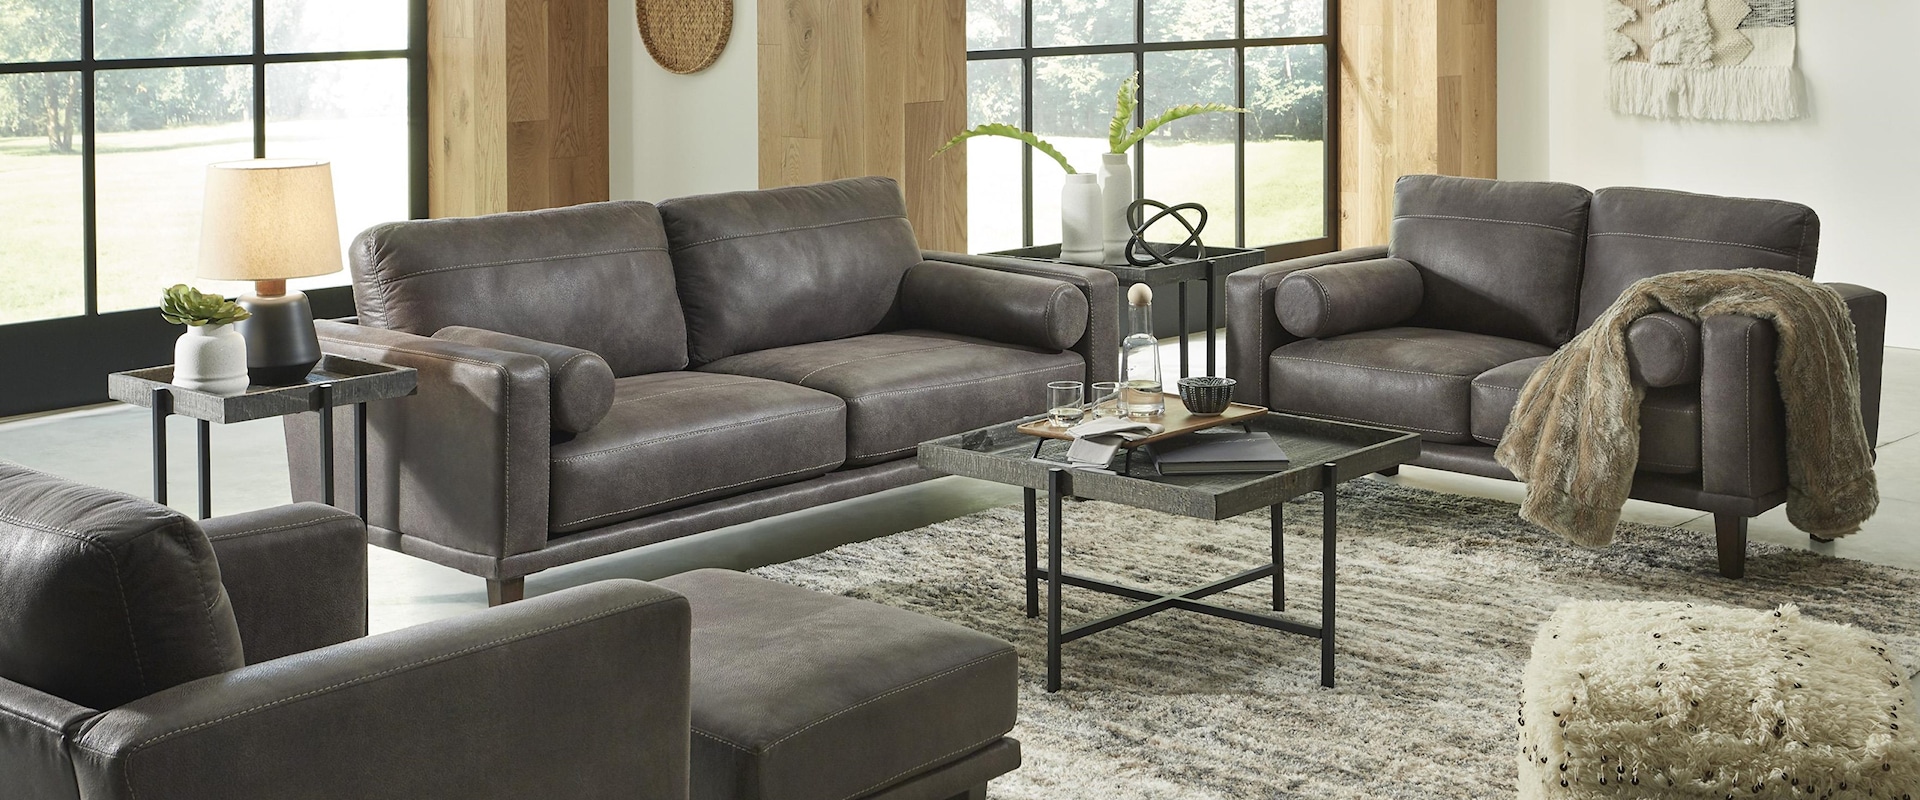 Faux Leather Sofa, Loveseat and Chair Set